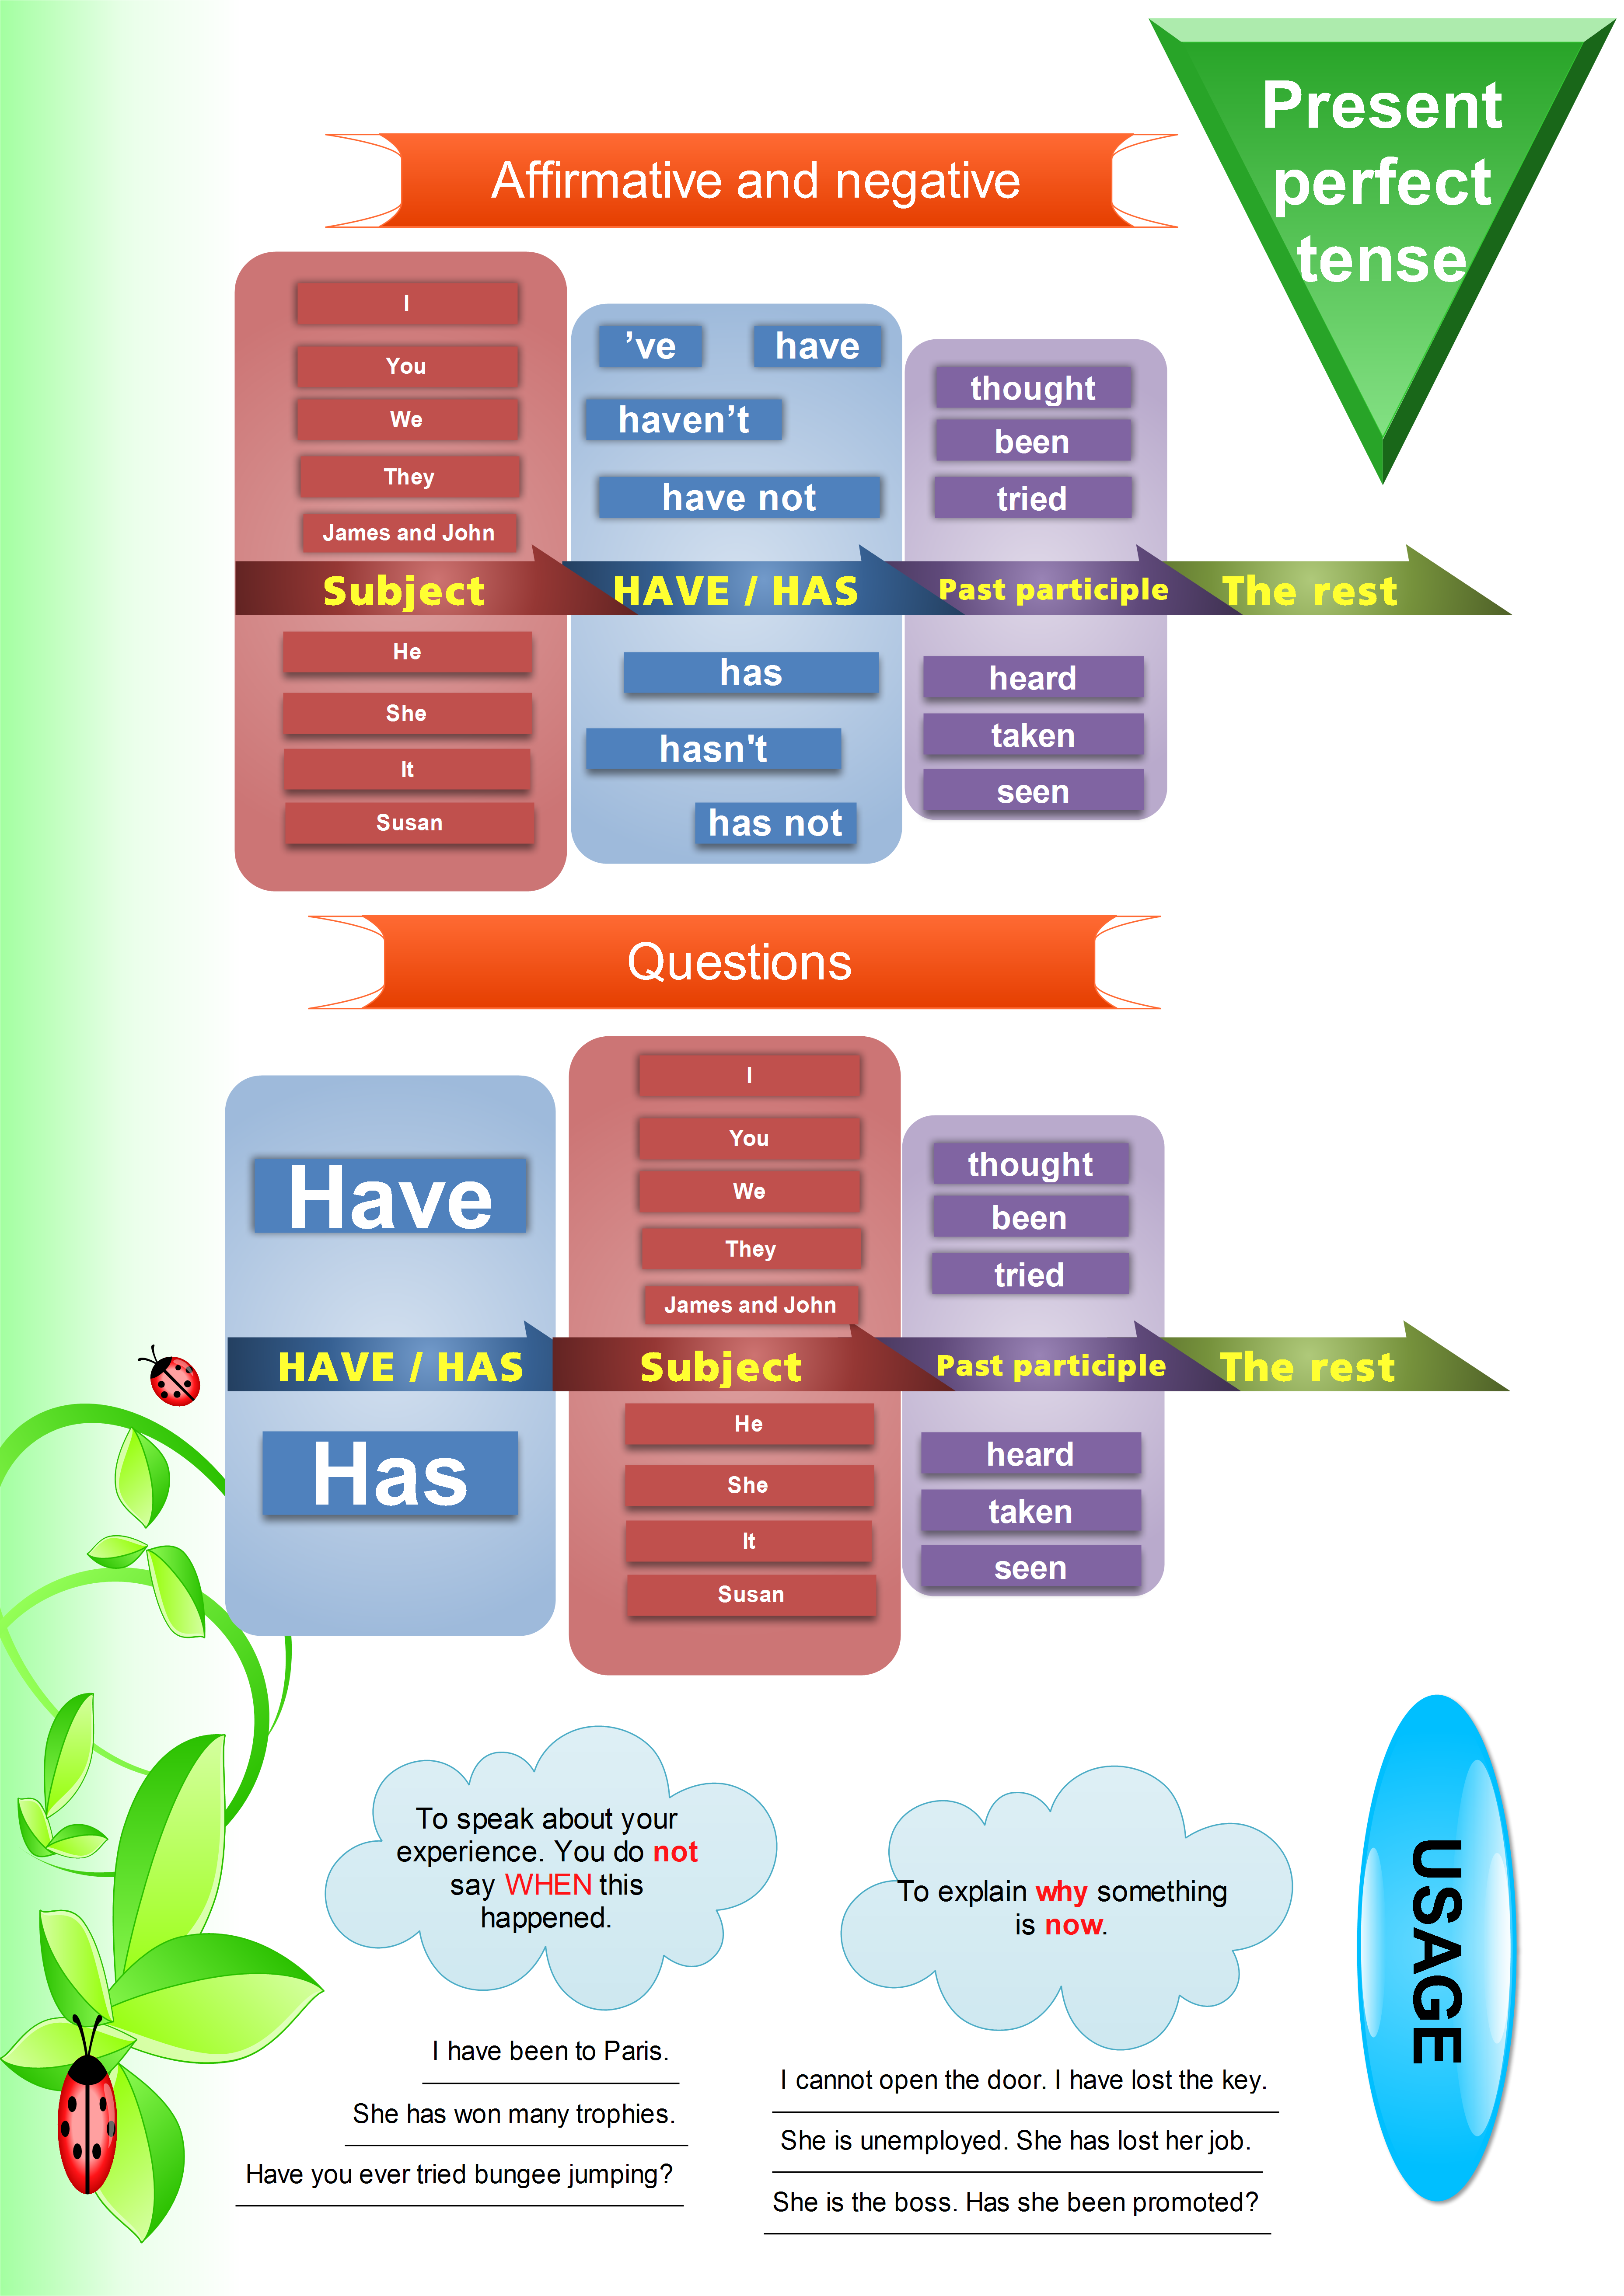 http://www.engames.eu/wp-content/uploads/2014/03/Present-perfect-complete-mind-map.png